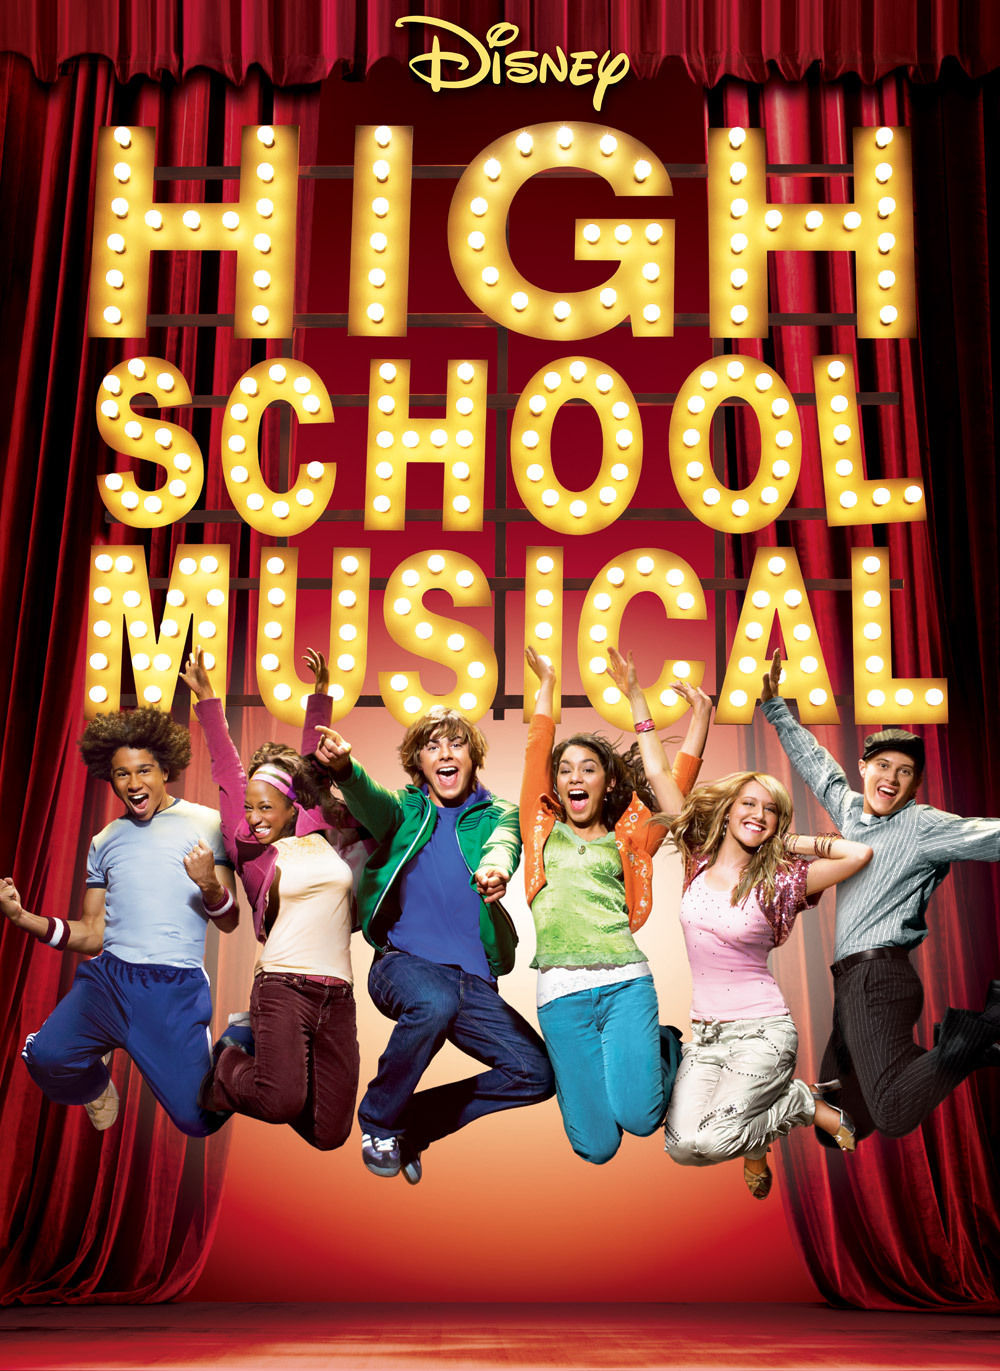 Can you finish these High School Musical lyrics?